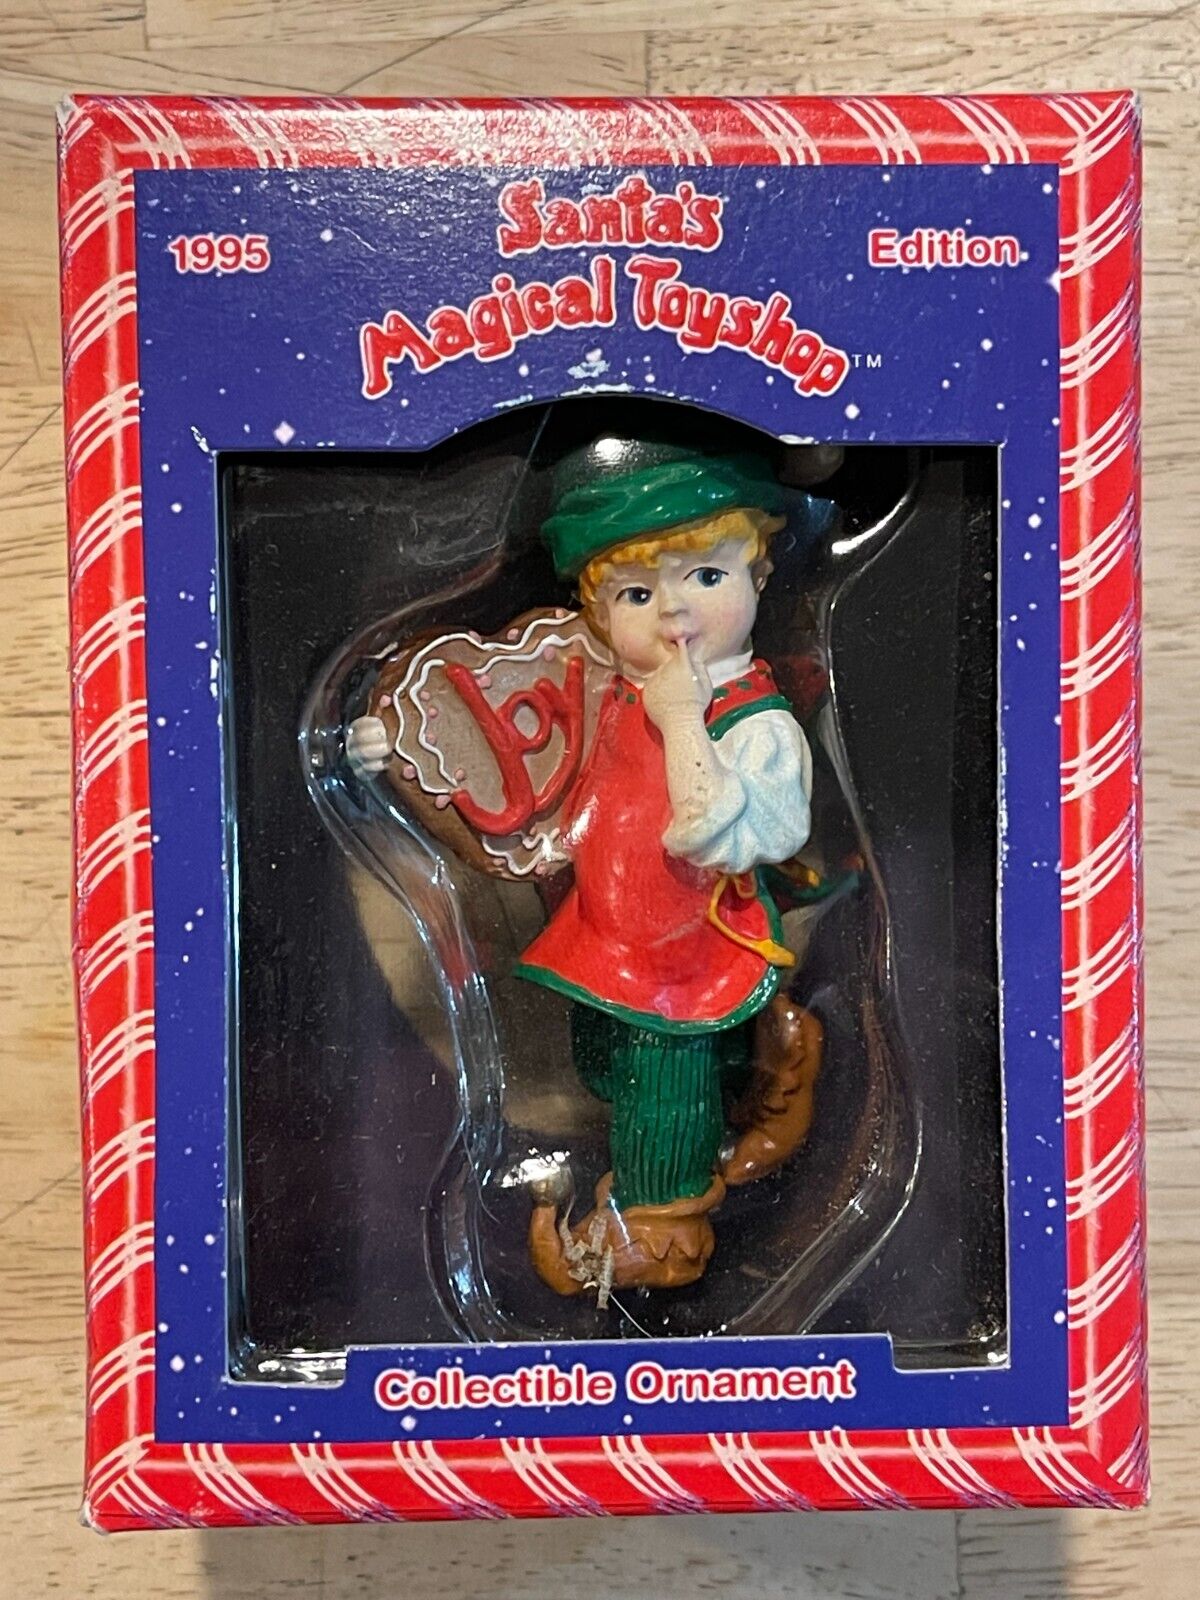 Santa's Magical Toy Shop - Christmas Ornament Elf with Joy Cookie - Year 1995